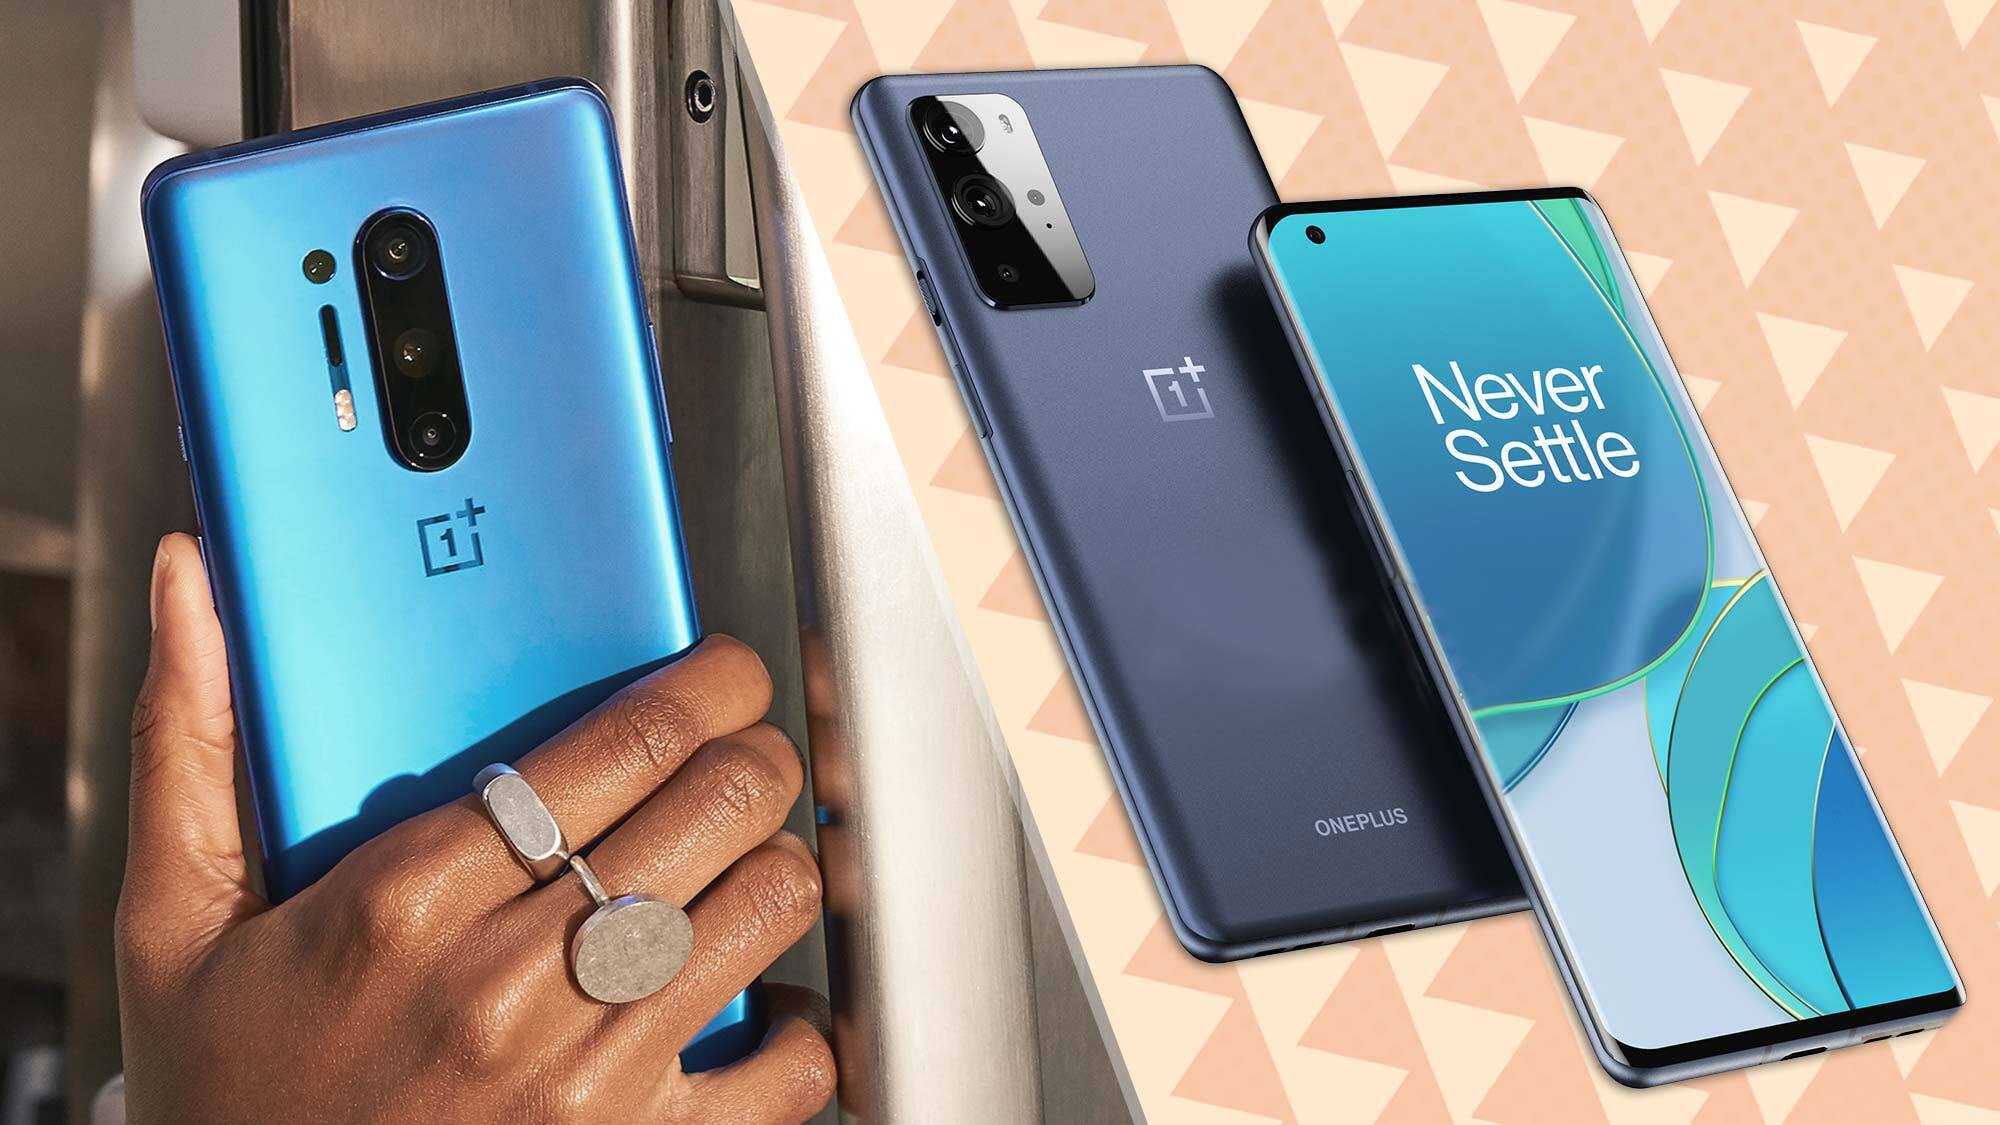 OnePlus 8 price cut after OnePlus 8T launch, here are new prices